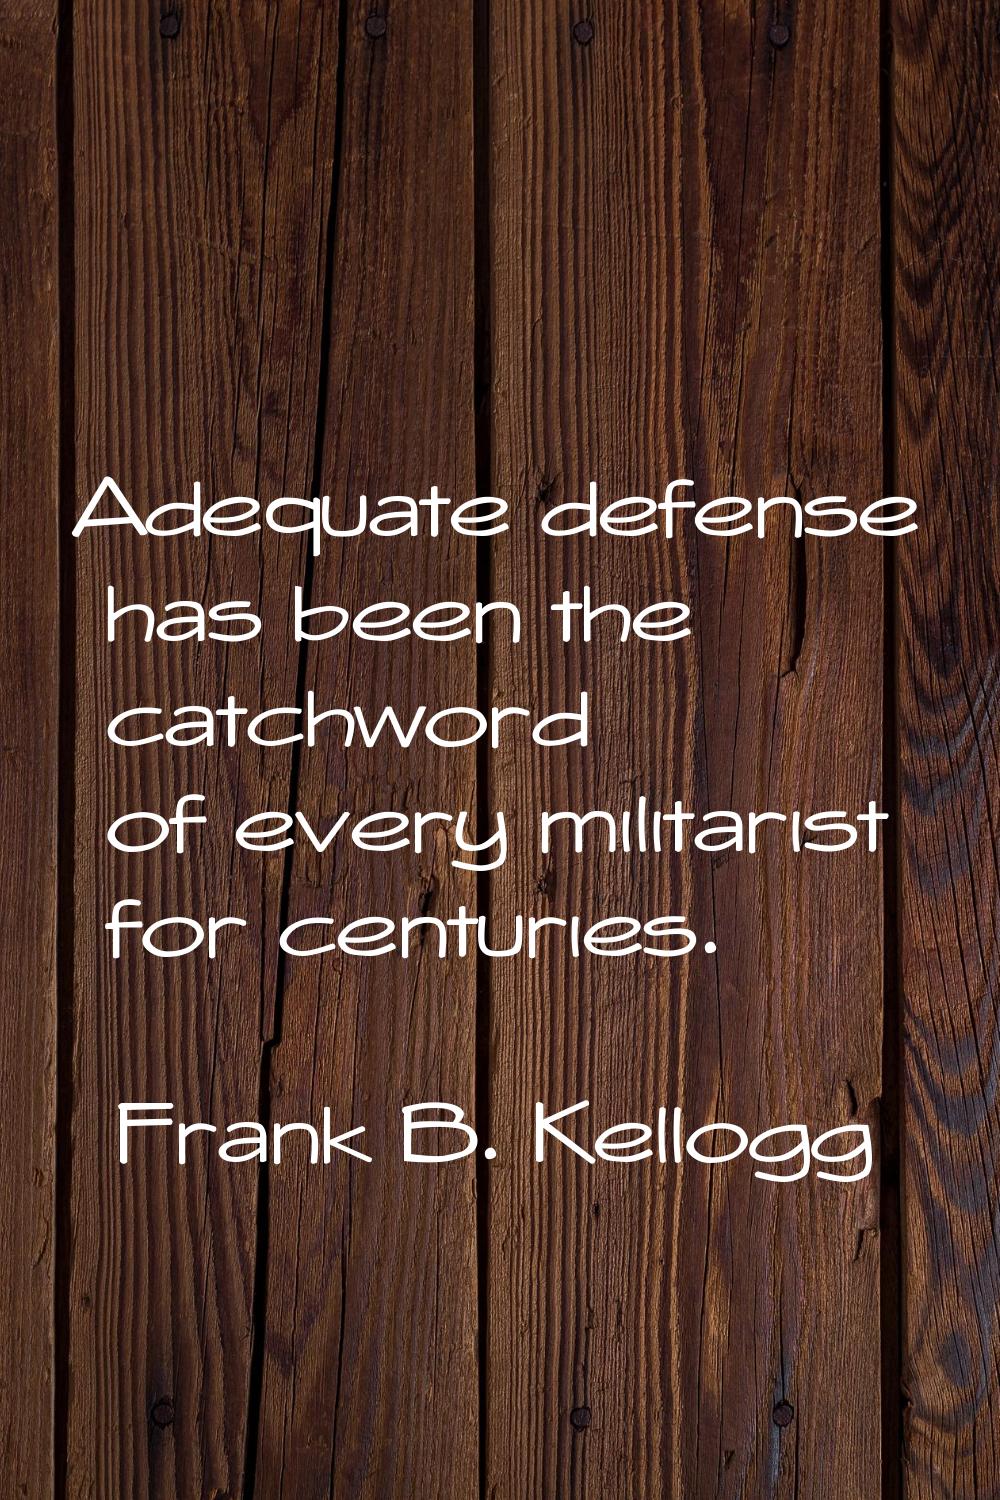 Adequate defense has been the catchword of every militarist for centuries.